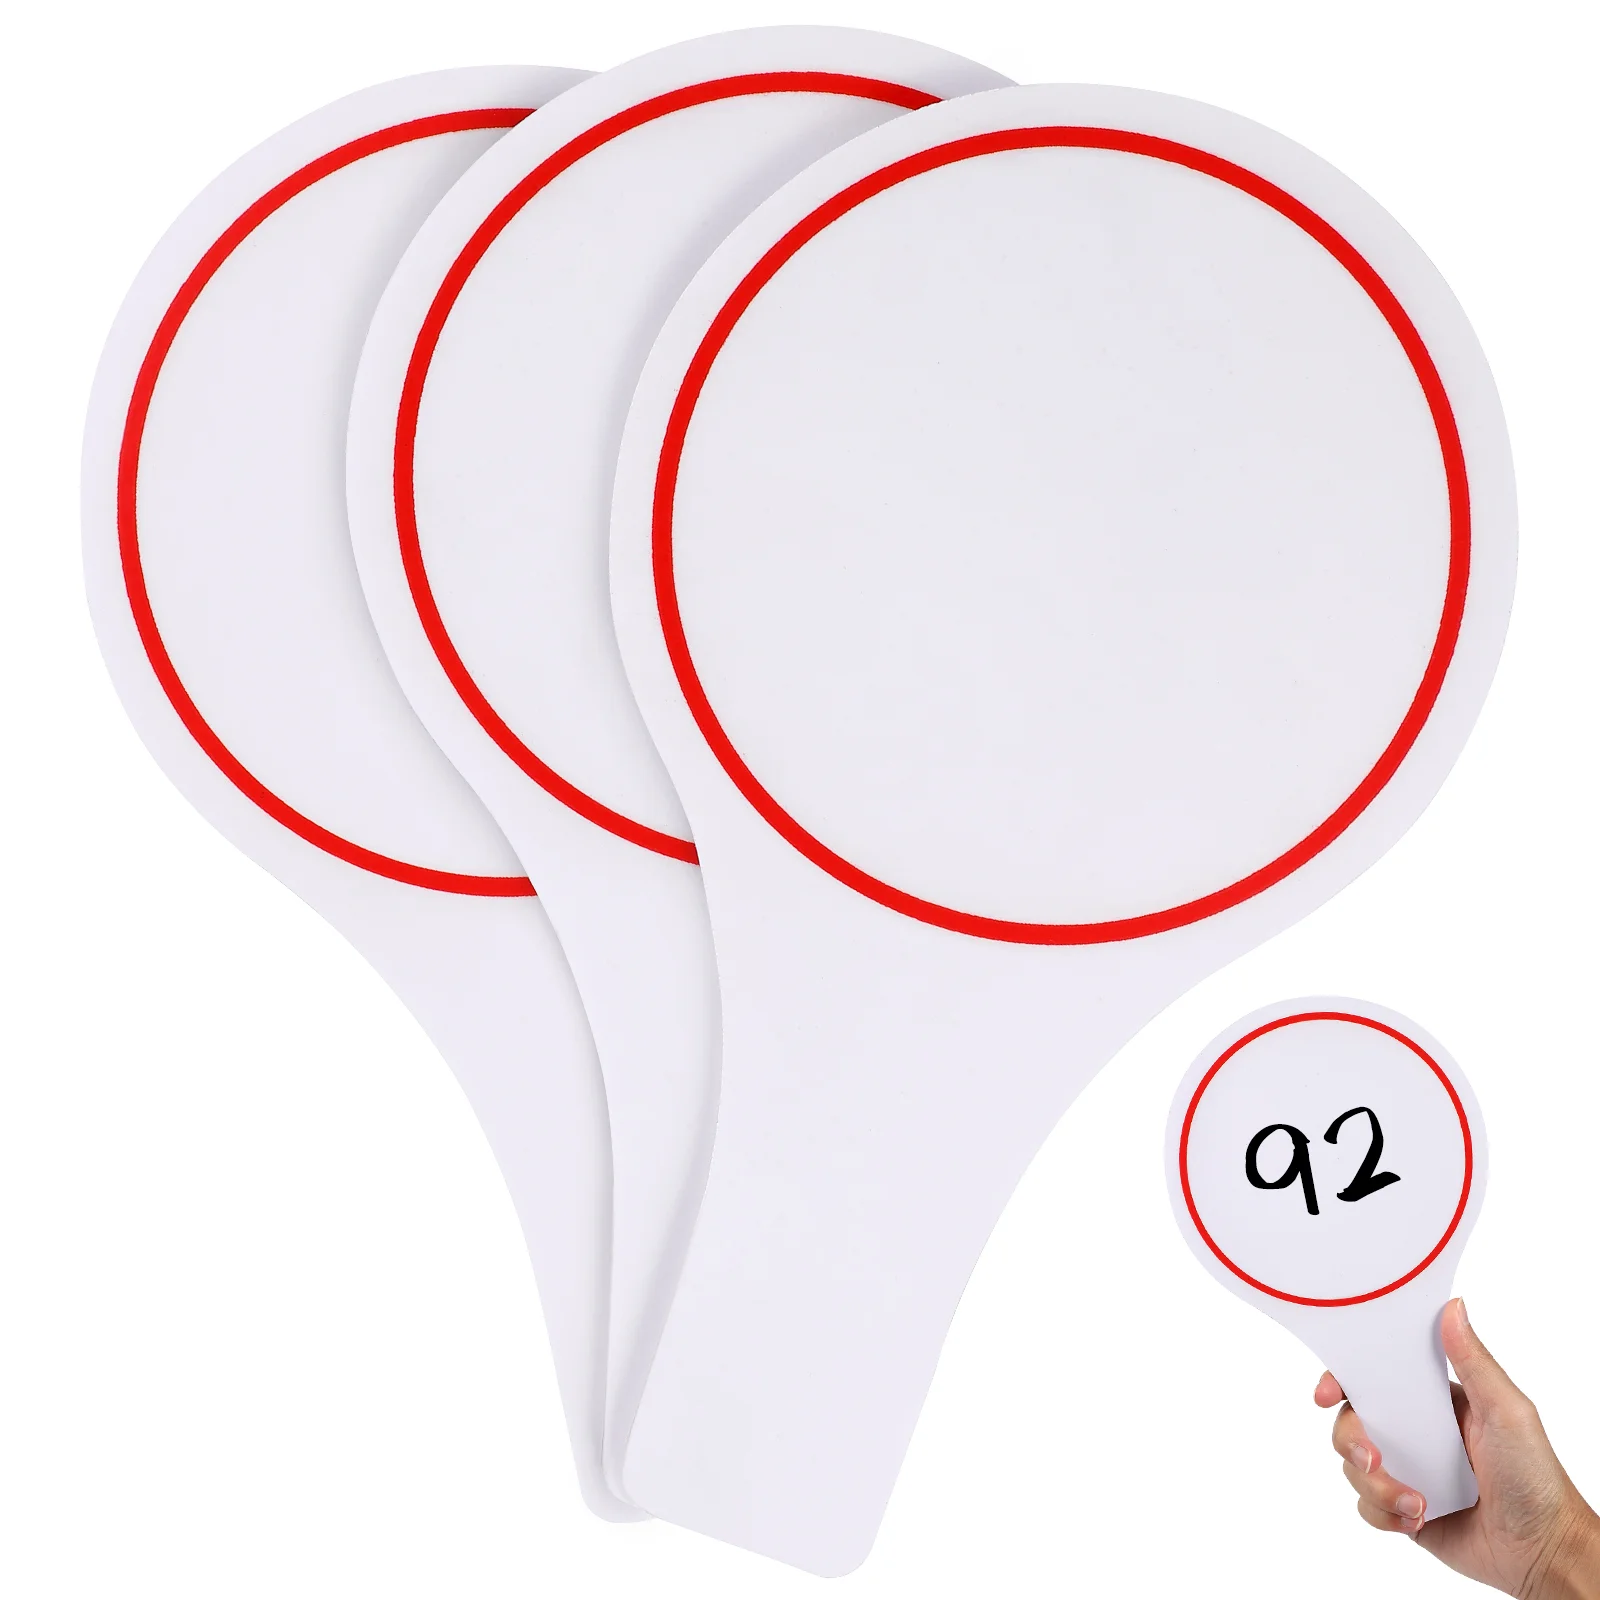 

3 Pcs Quick Response White Boards Handheld Erasable Writing Board Small Scoreboards for Teacher Student Teaching Props